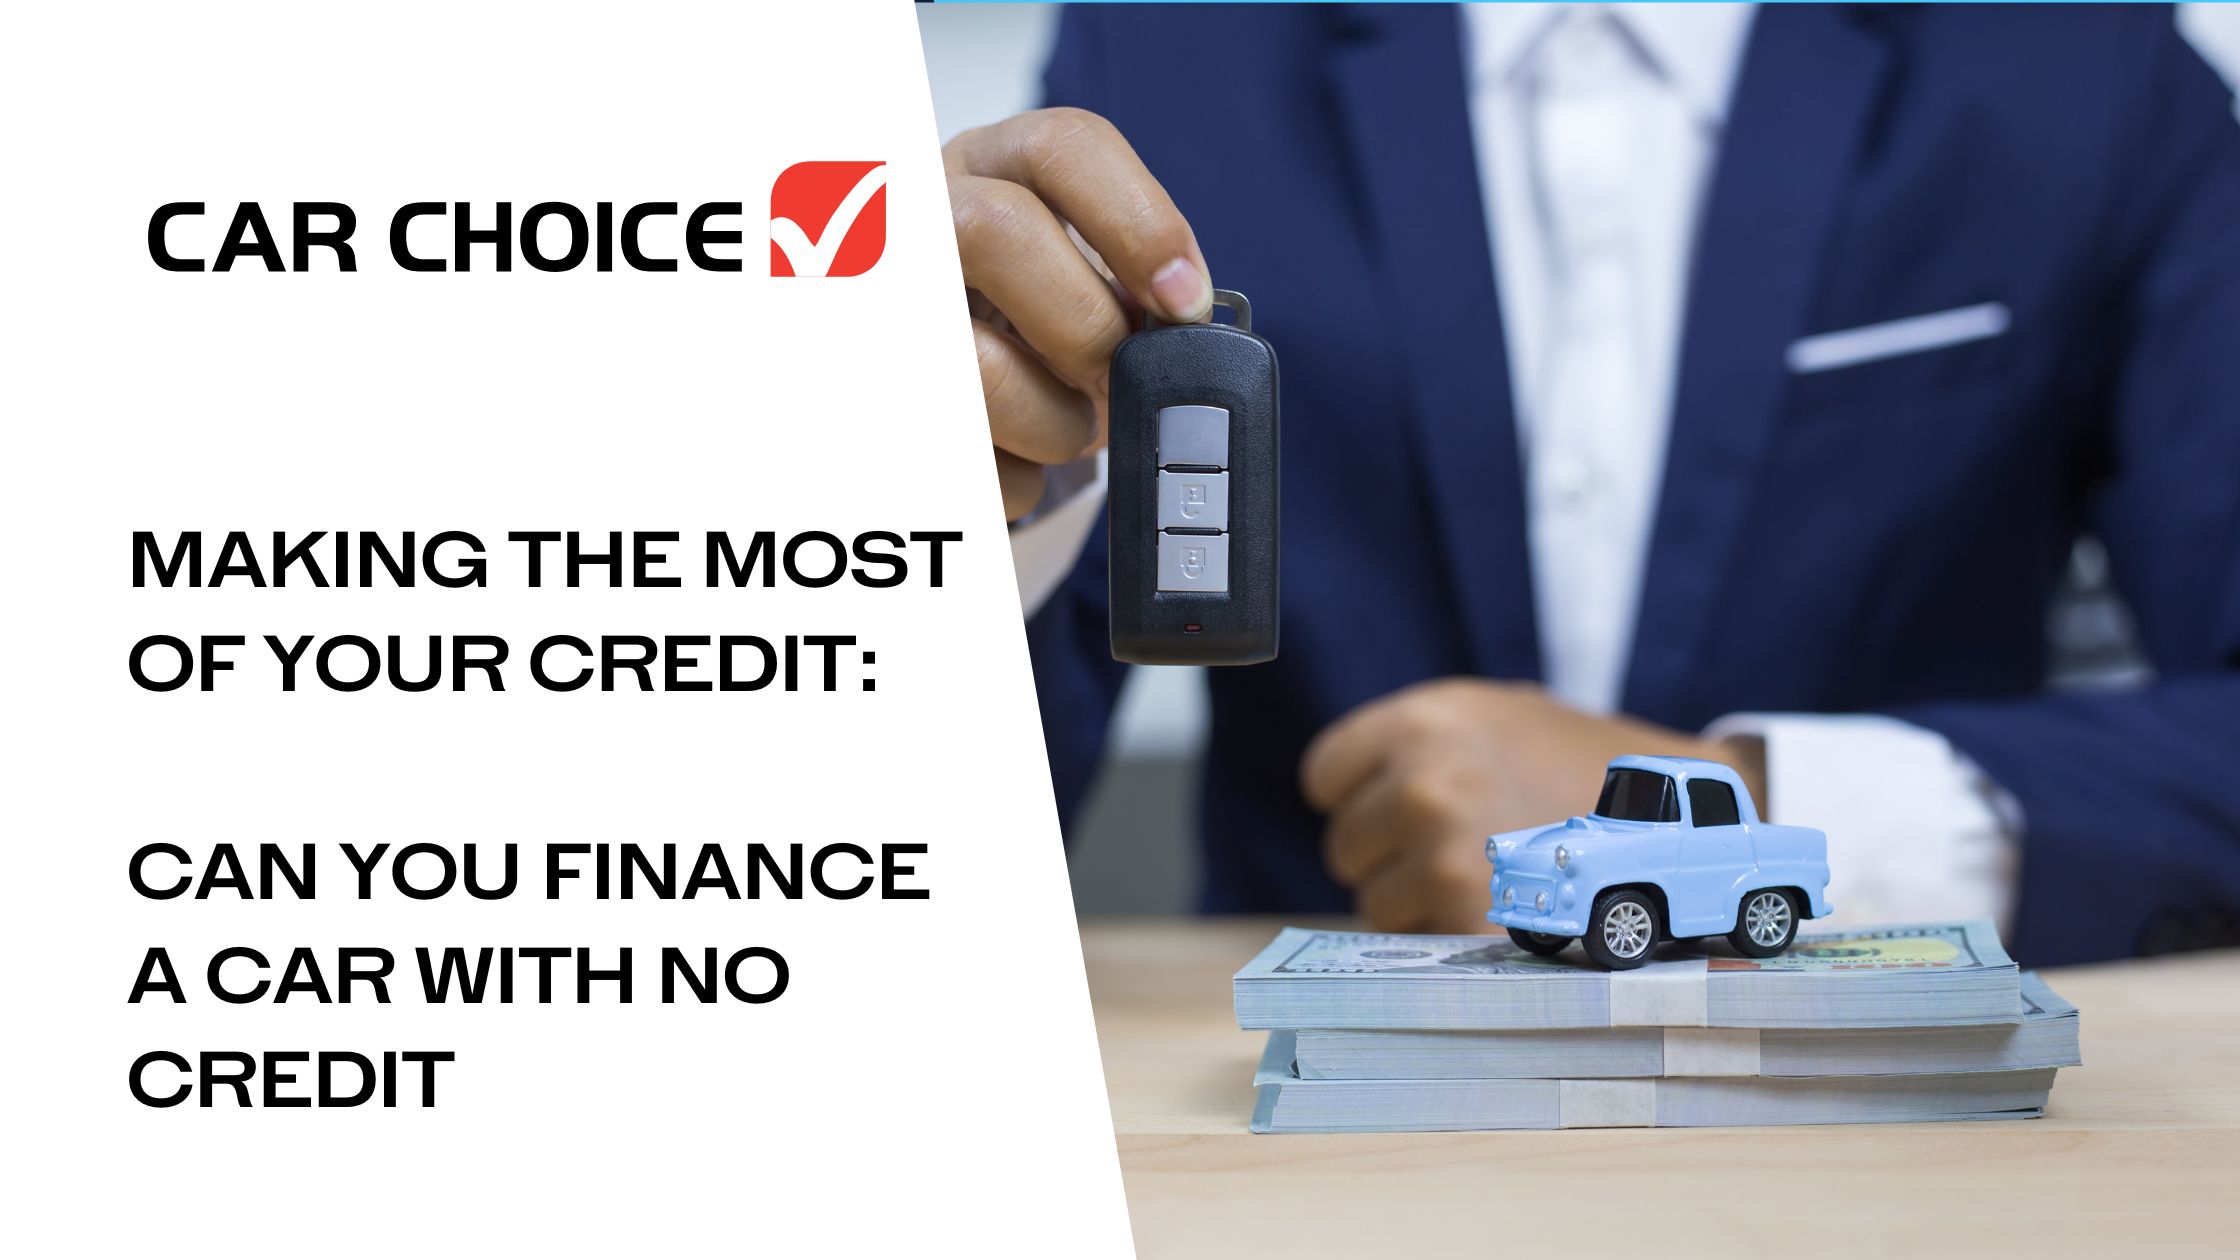 Making the Most of Your Credit: Can You Finance a Car with No Credit